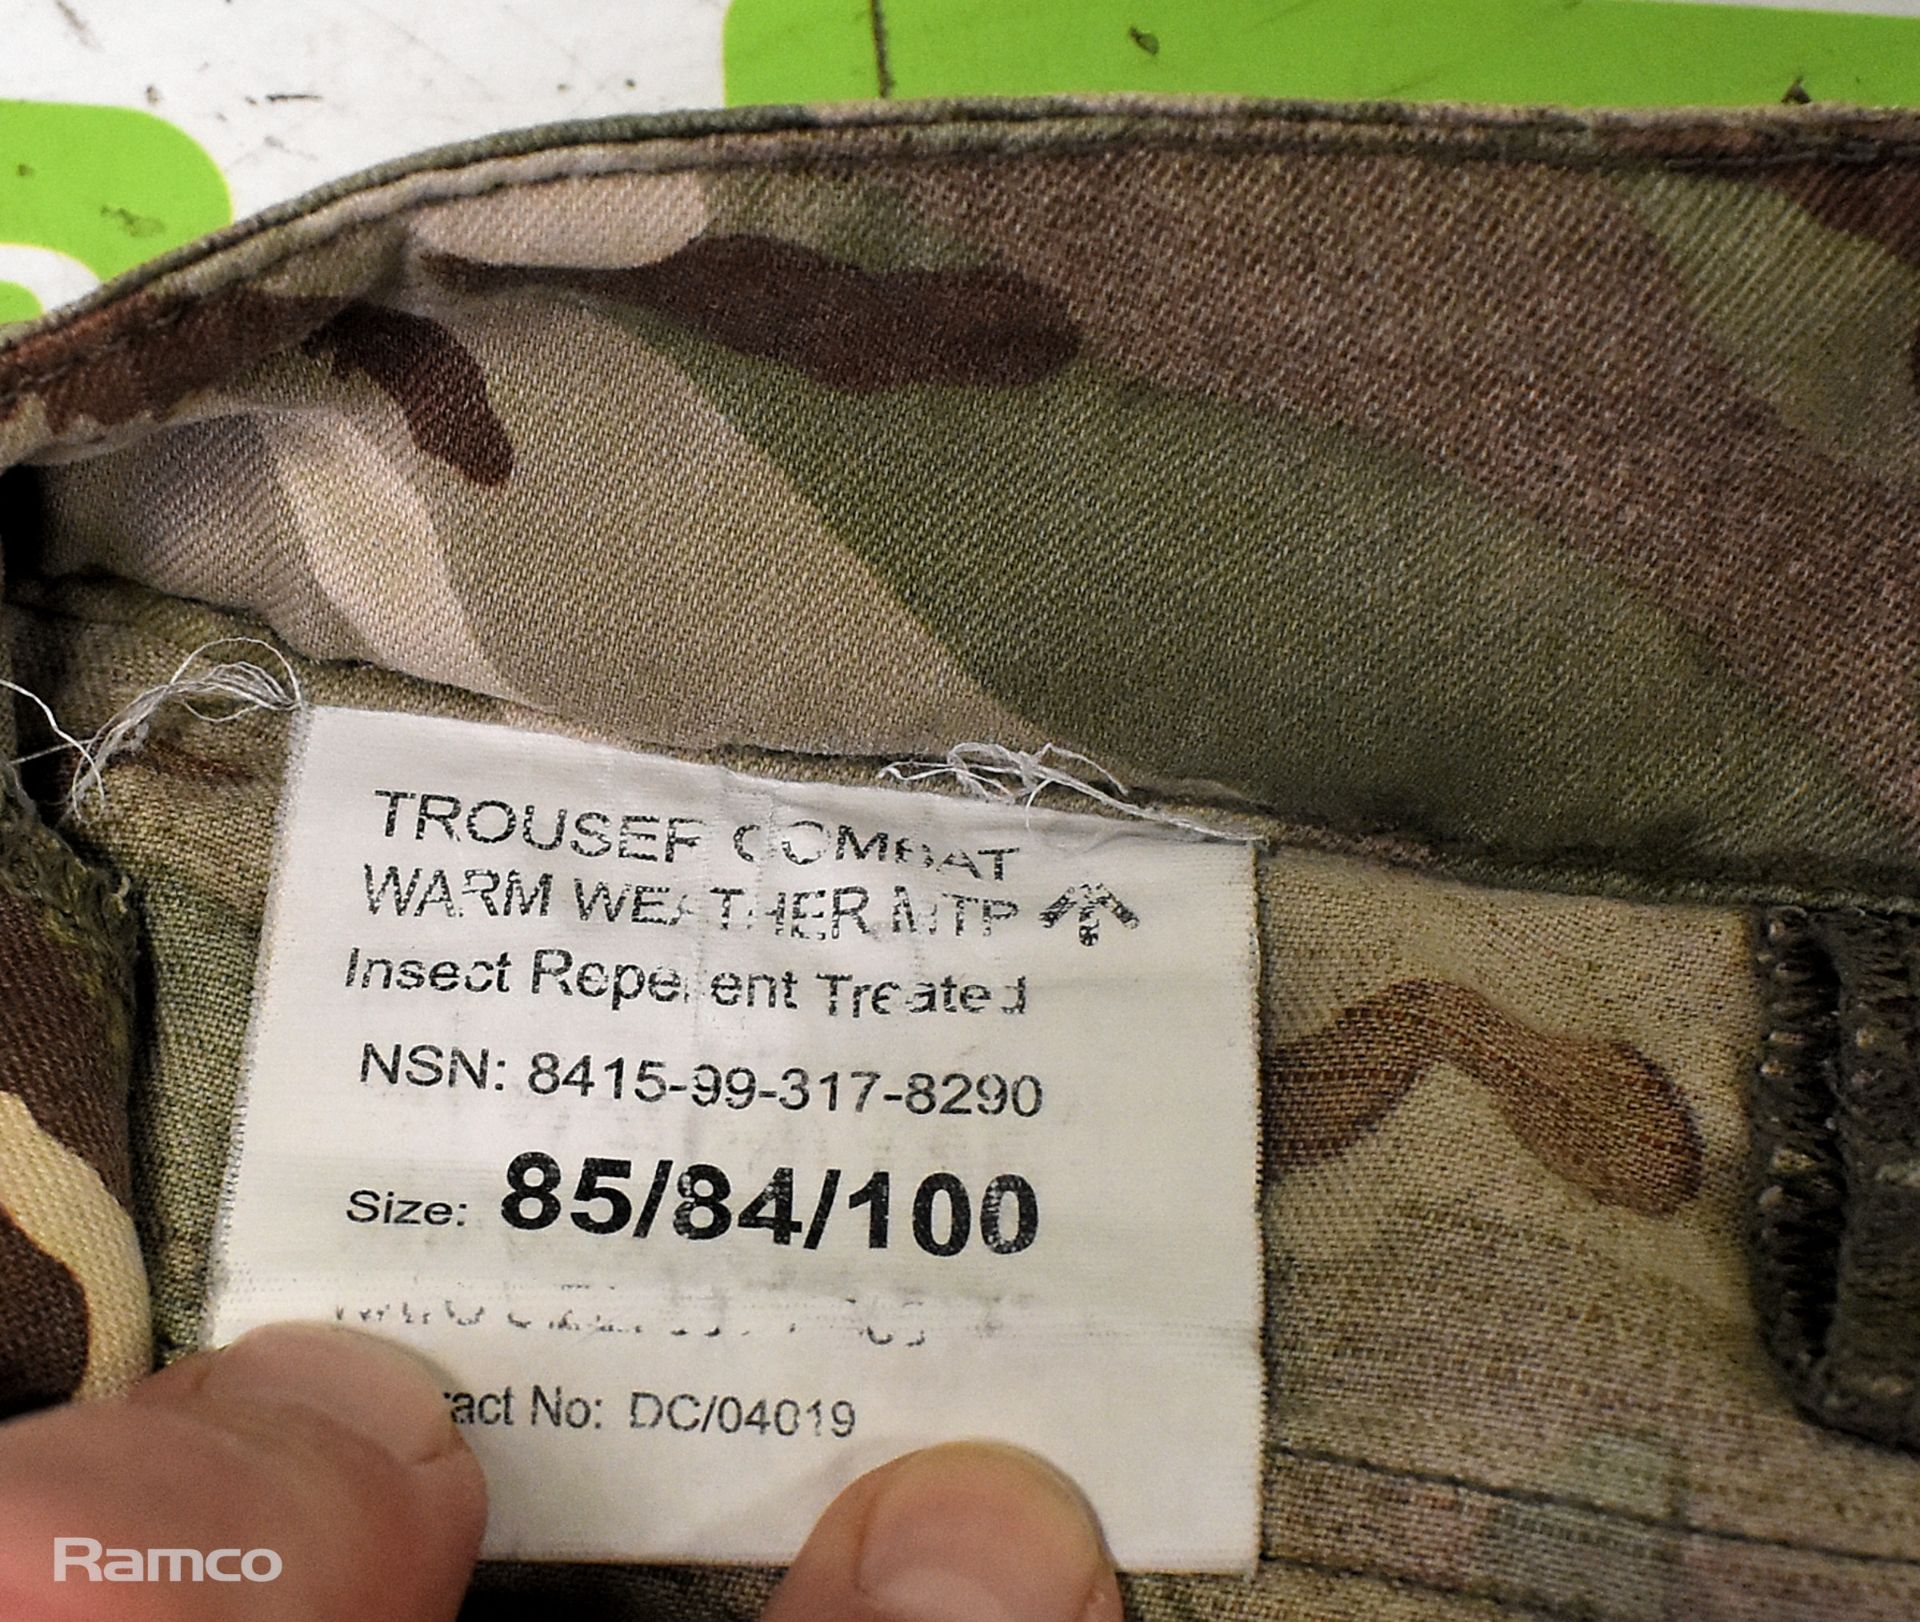 110x British Army MTP combat trousers - mixed grades and sizes - Image 4 of 6